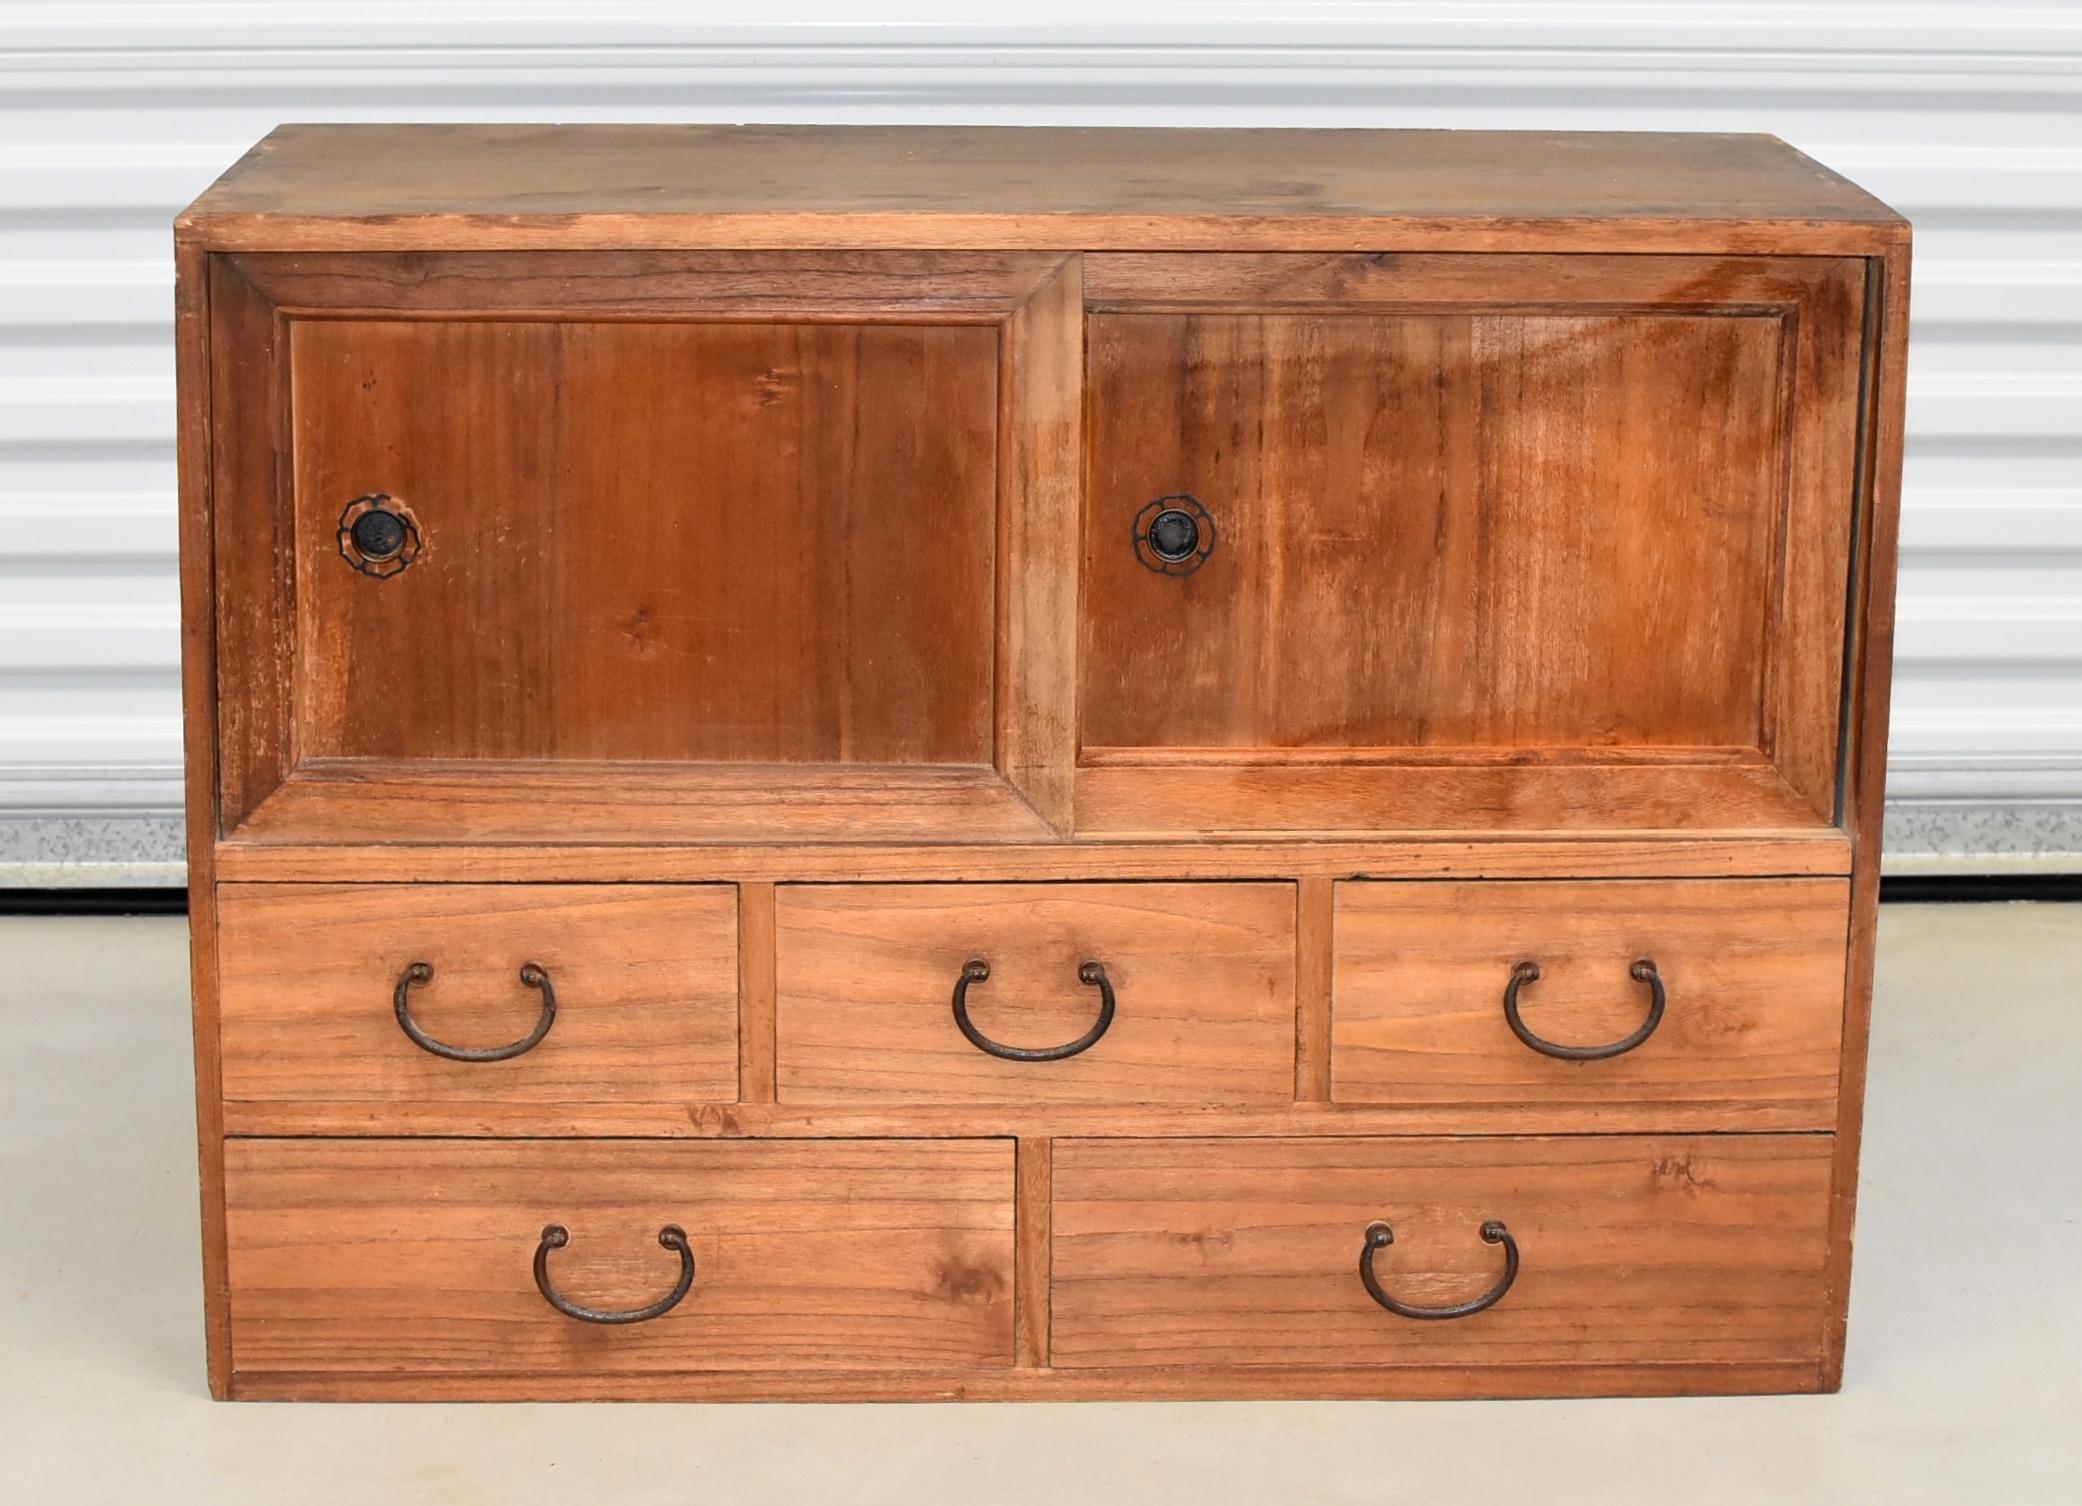 A beautiful vintage, Meiji period, Japanese low Tansu with a large compartment and five full capacity drawers. Unique, hand crafted solid iron hardware include daisy patterned door sliders and elegant classic drawer pulls. A very versatile piece.